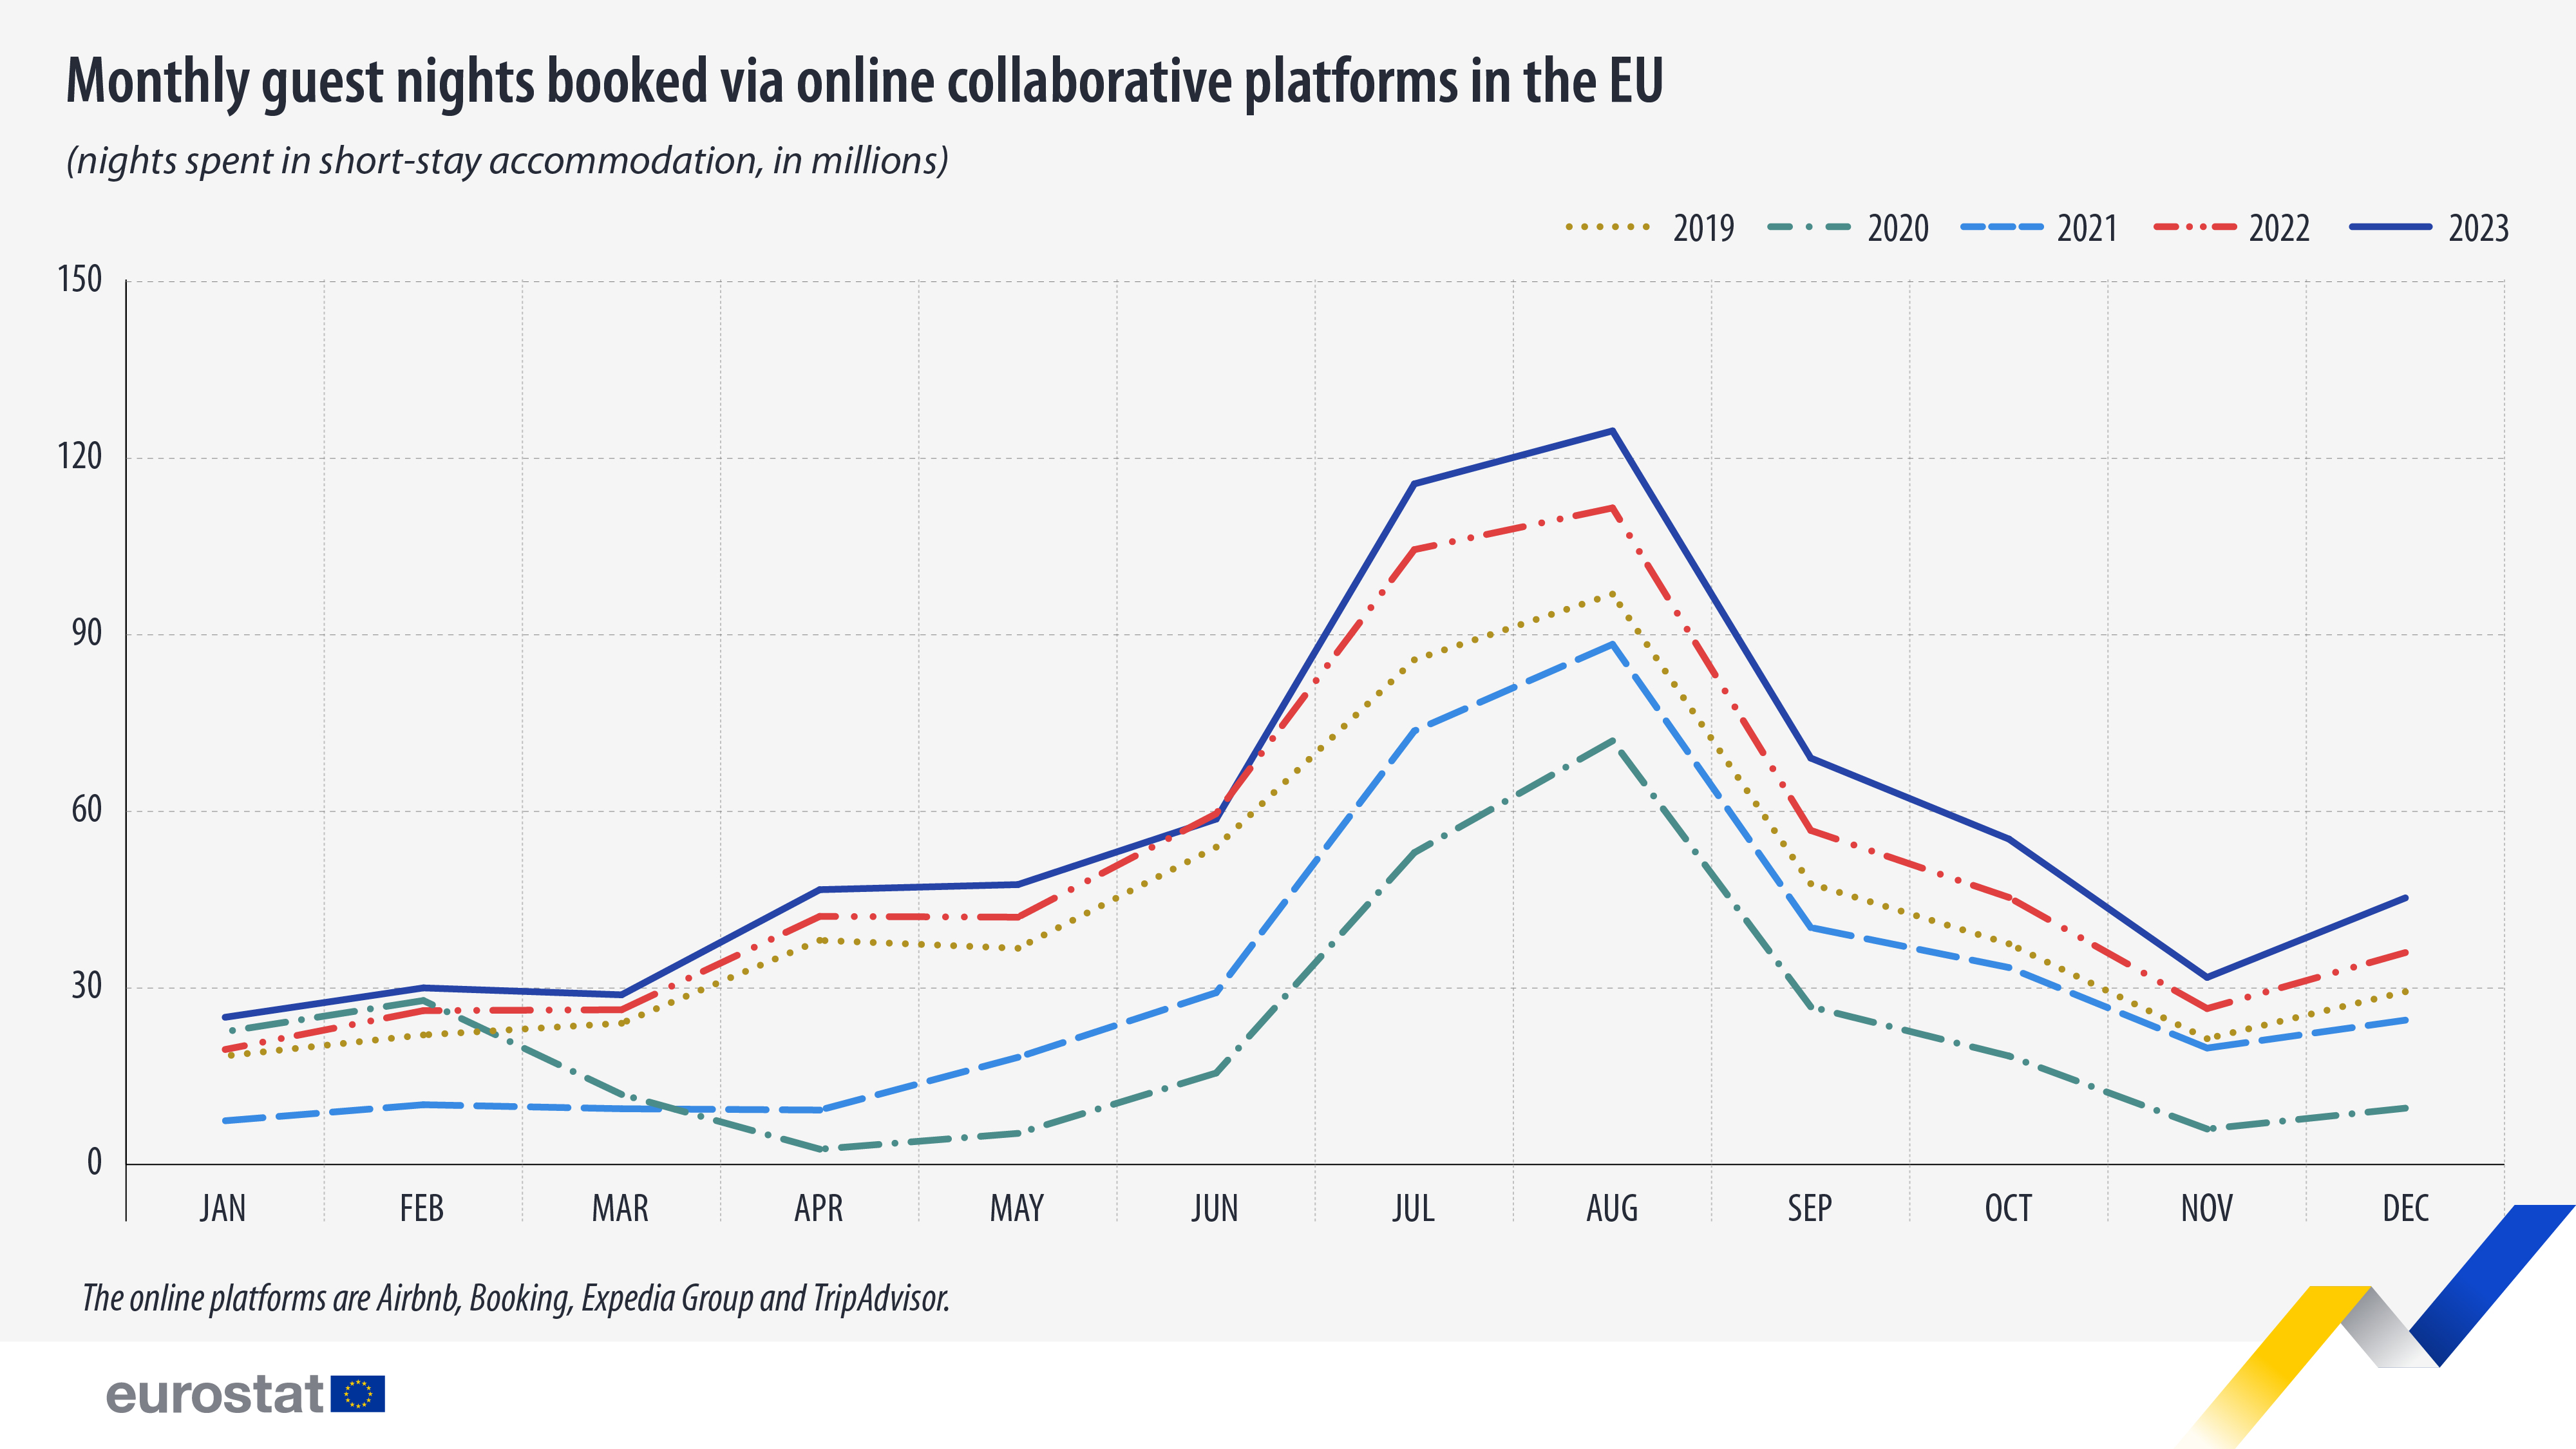 Monthly guest nights booked via online platforms in the EU, nights spent in short-stay accommodation, in million. Chart. See link to full dataset below.